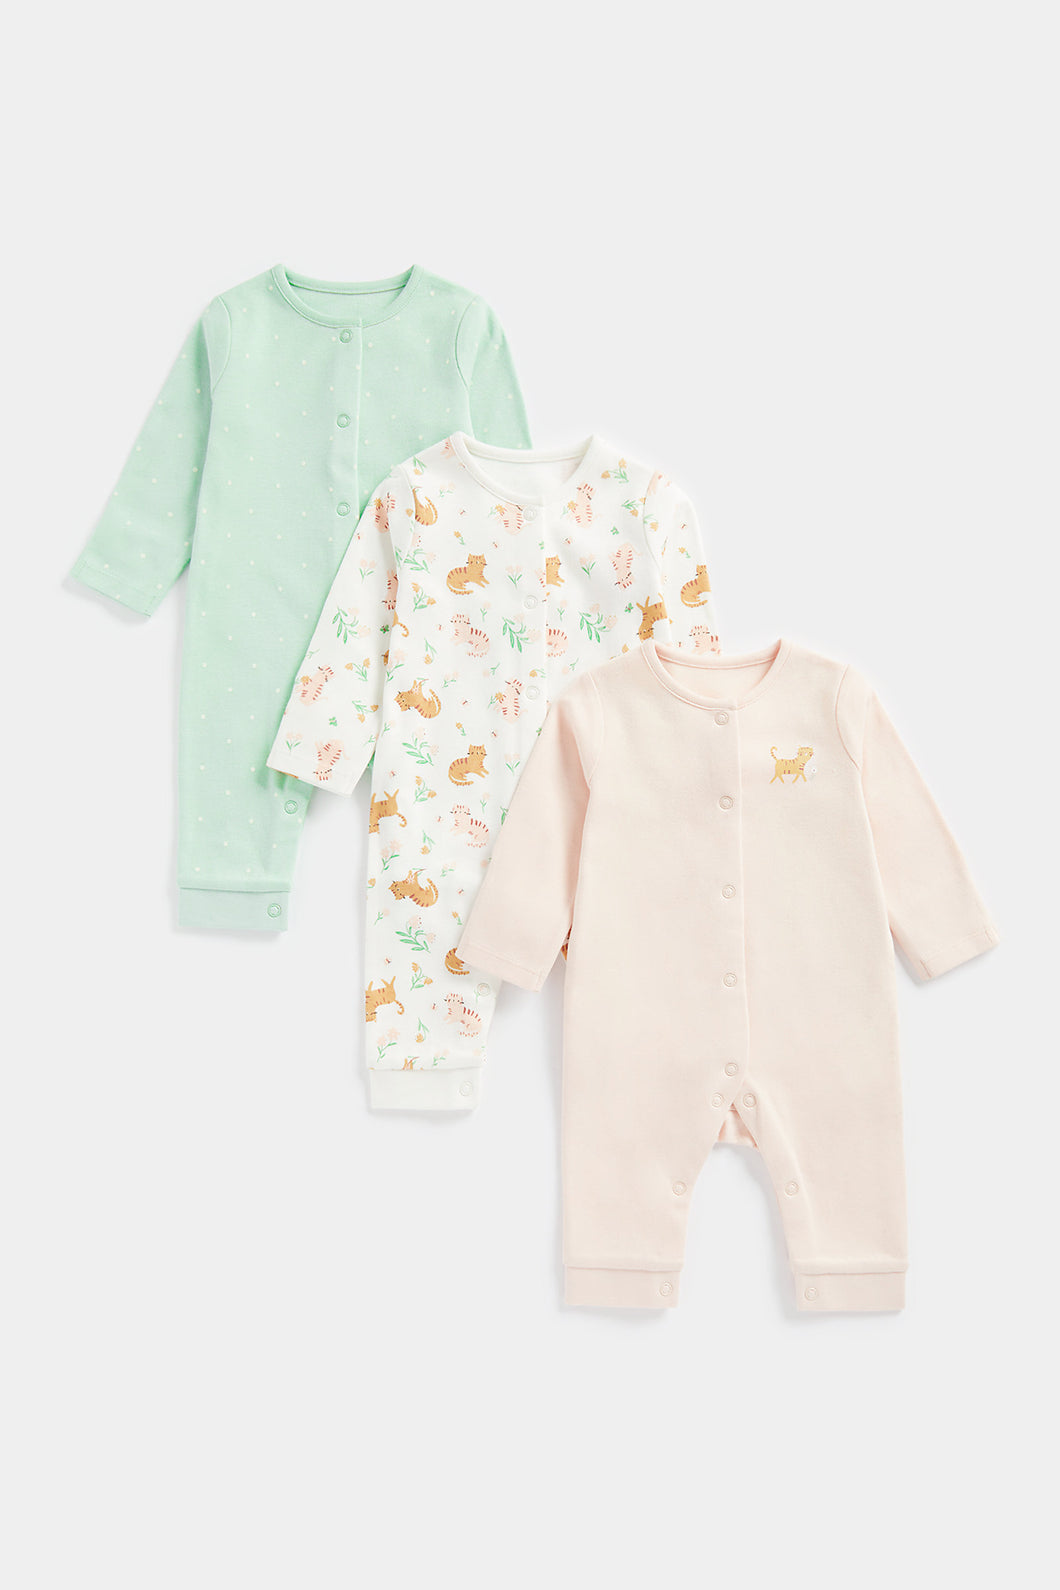 Mothercare Kitten Footless Baby Sleepsuits - 3 Pack